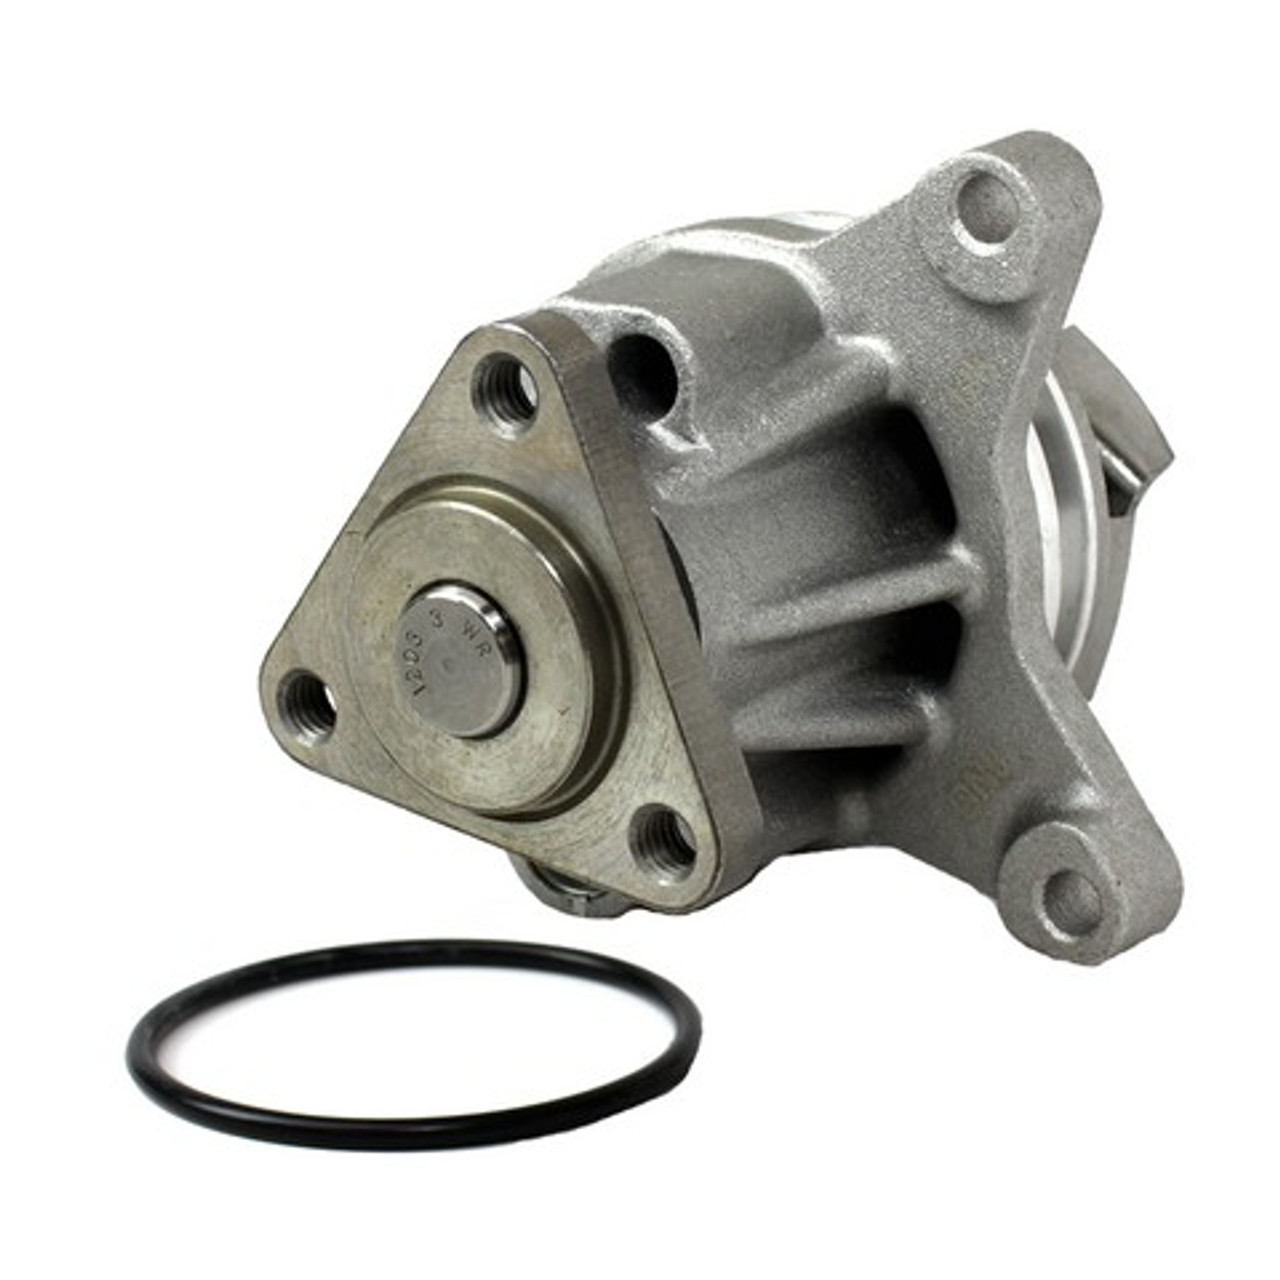 Water Pump 2.0L 2007 Ford Focus - WP4032.31